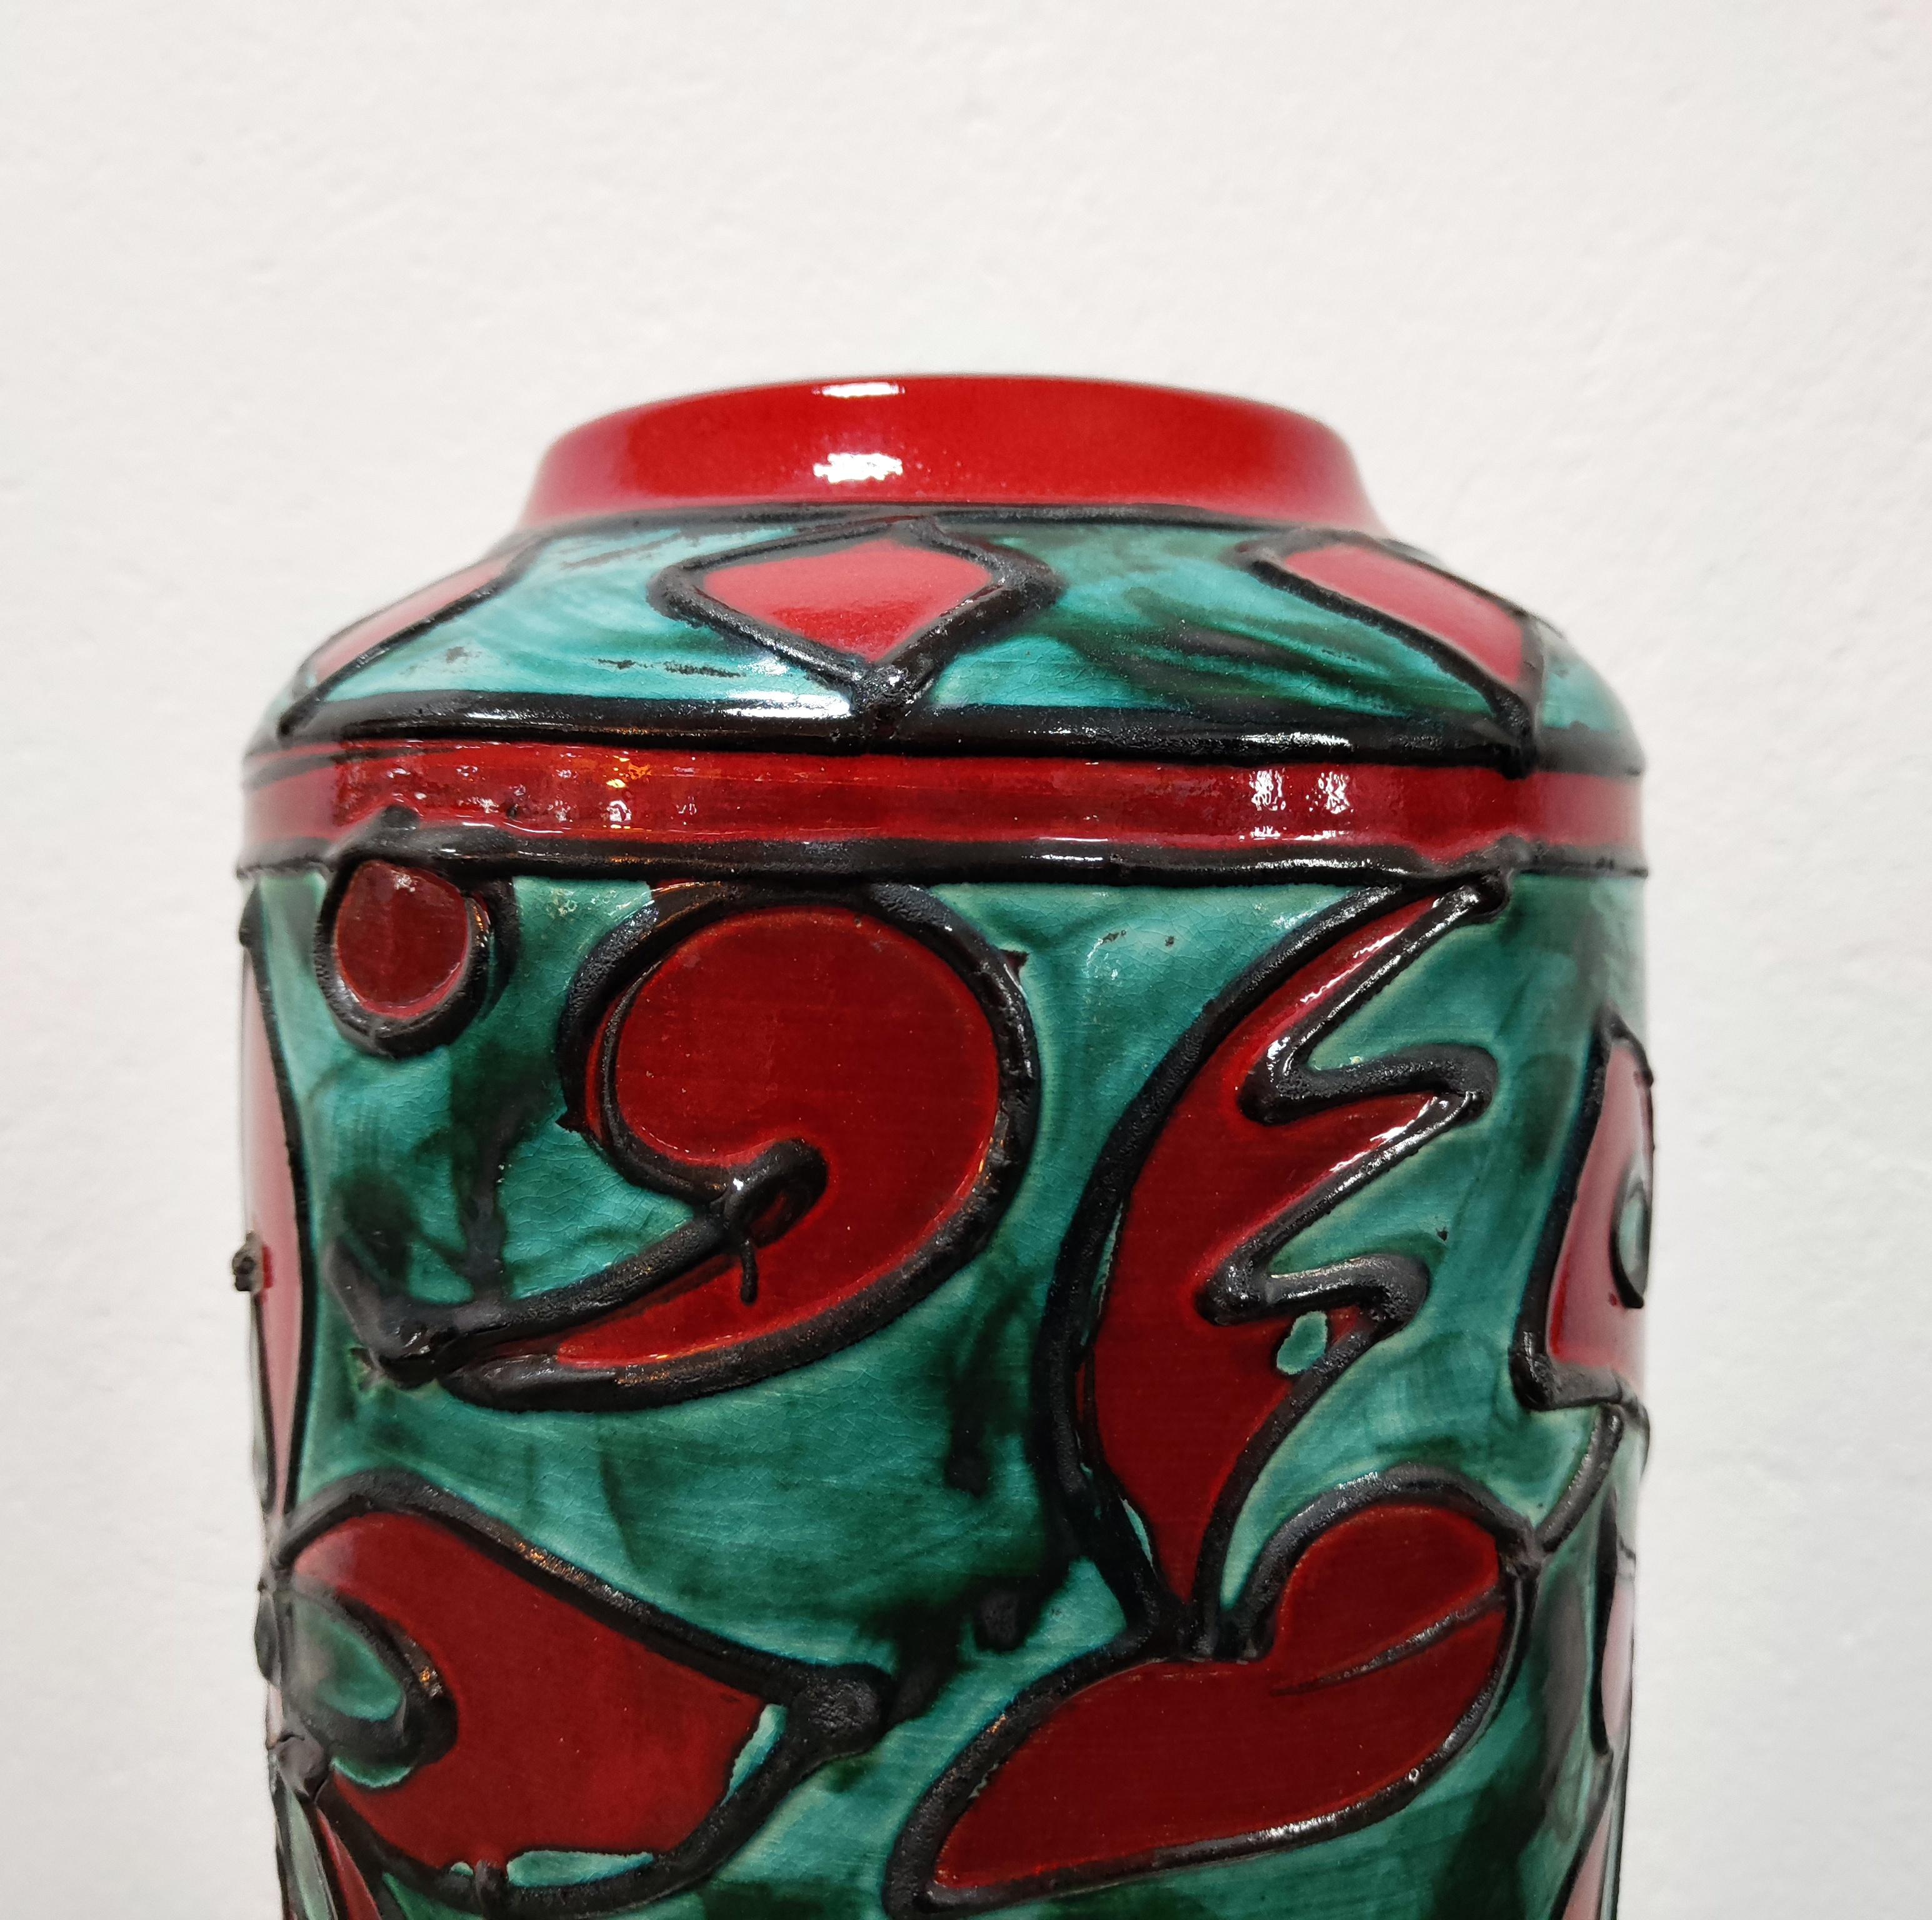 In this listing you will find an extra large, gorgeous fat lava ceramic Floor Vase manufactured by Scheurich in late 1960s. The vase features floral elements done in stark contrast of green and red. This very decorative piece could be used as a vase